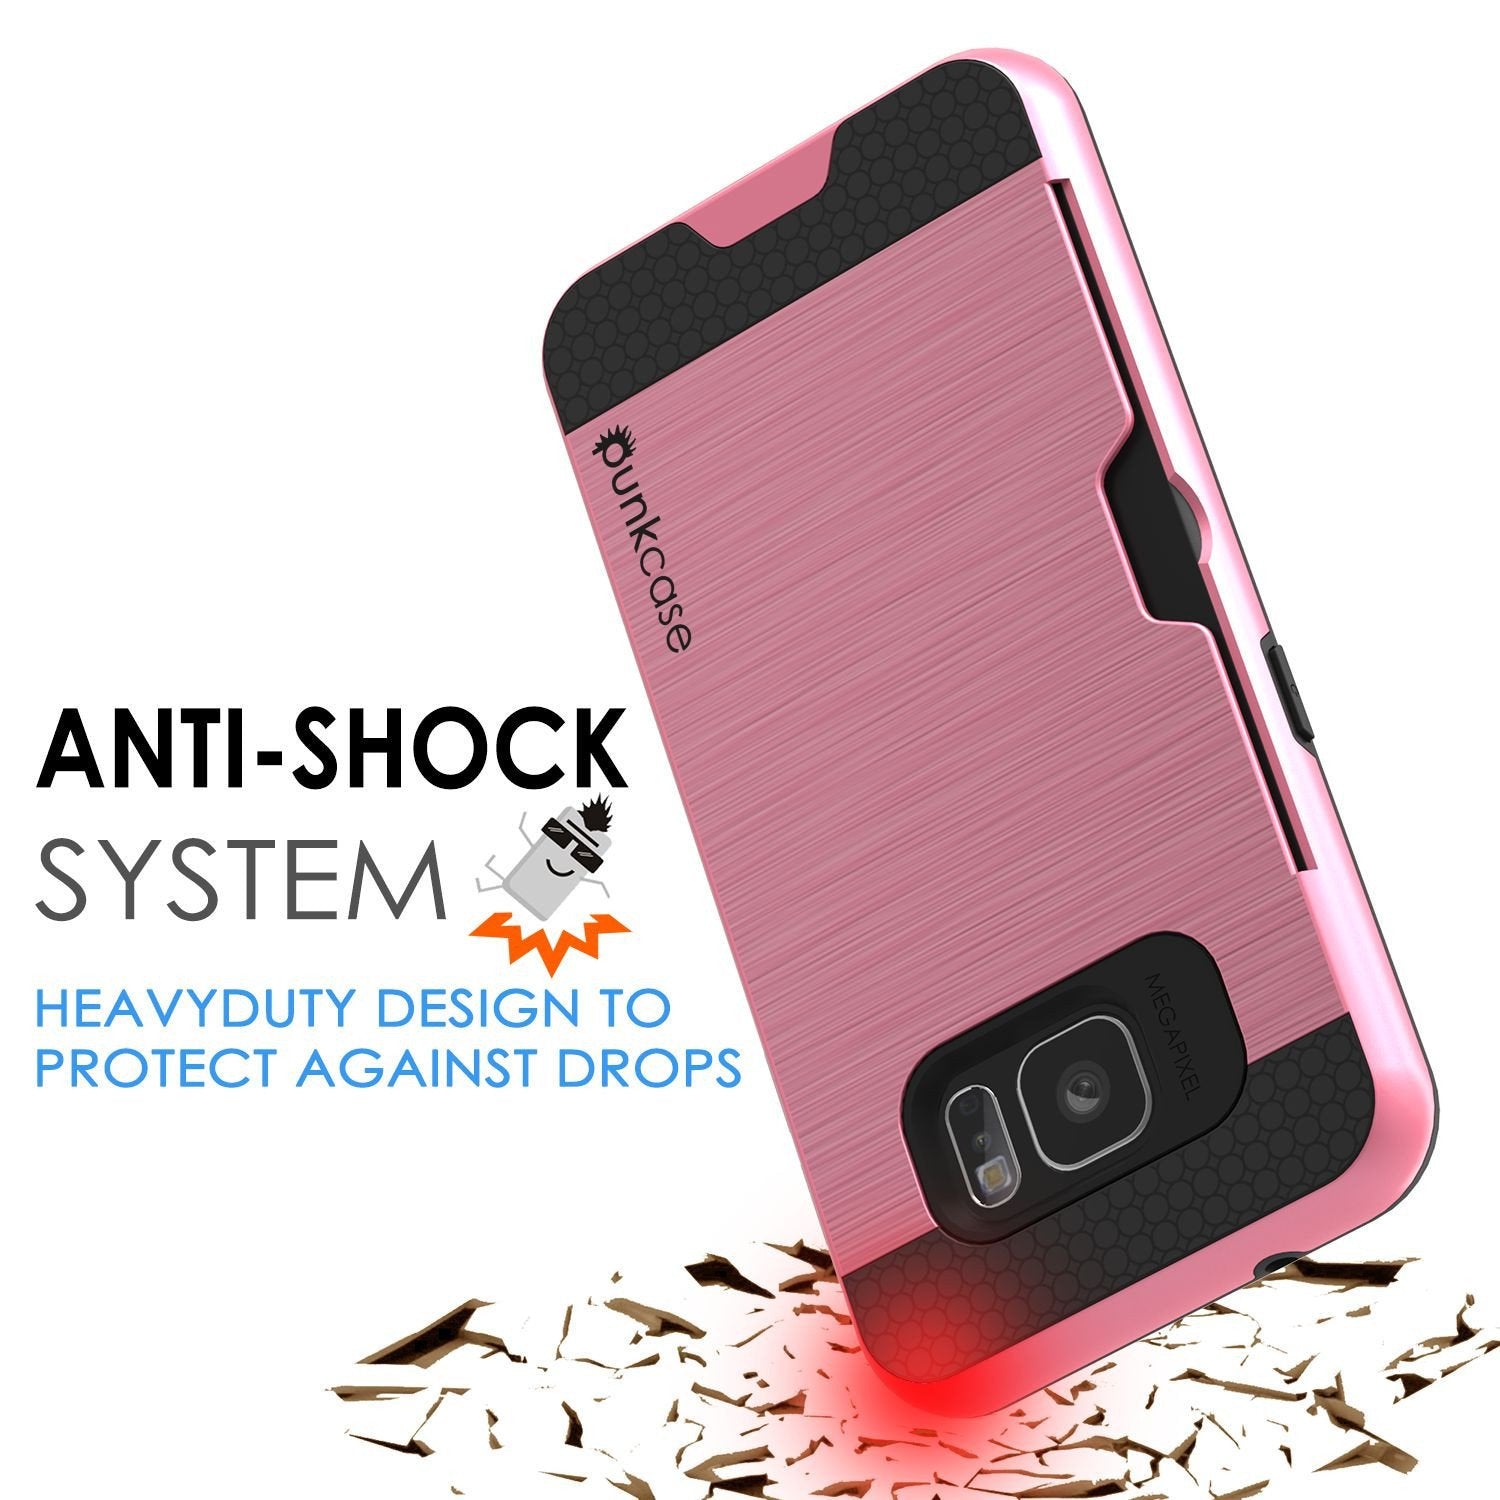 Galaxy s7 EDGE Case PunkCase SLOT Pink Series Slim Armor Soft Cover Case